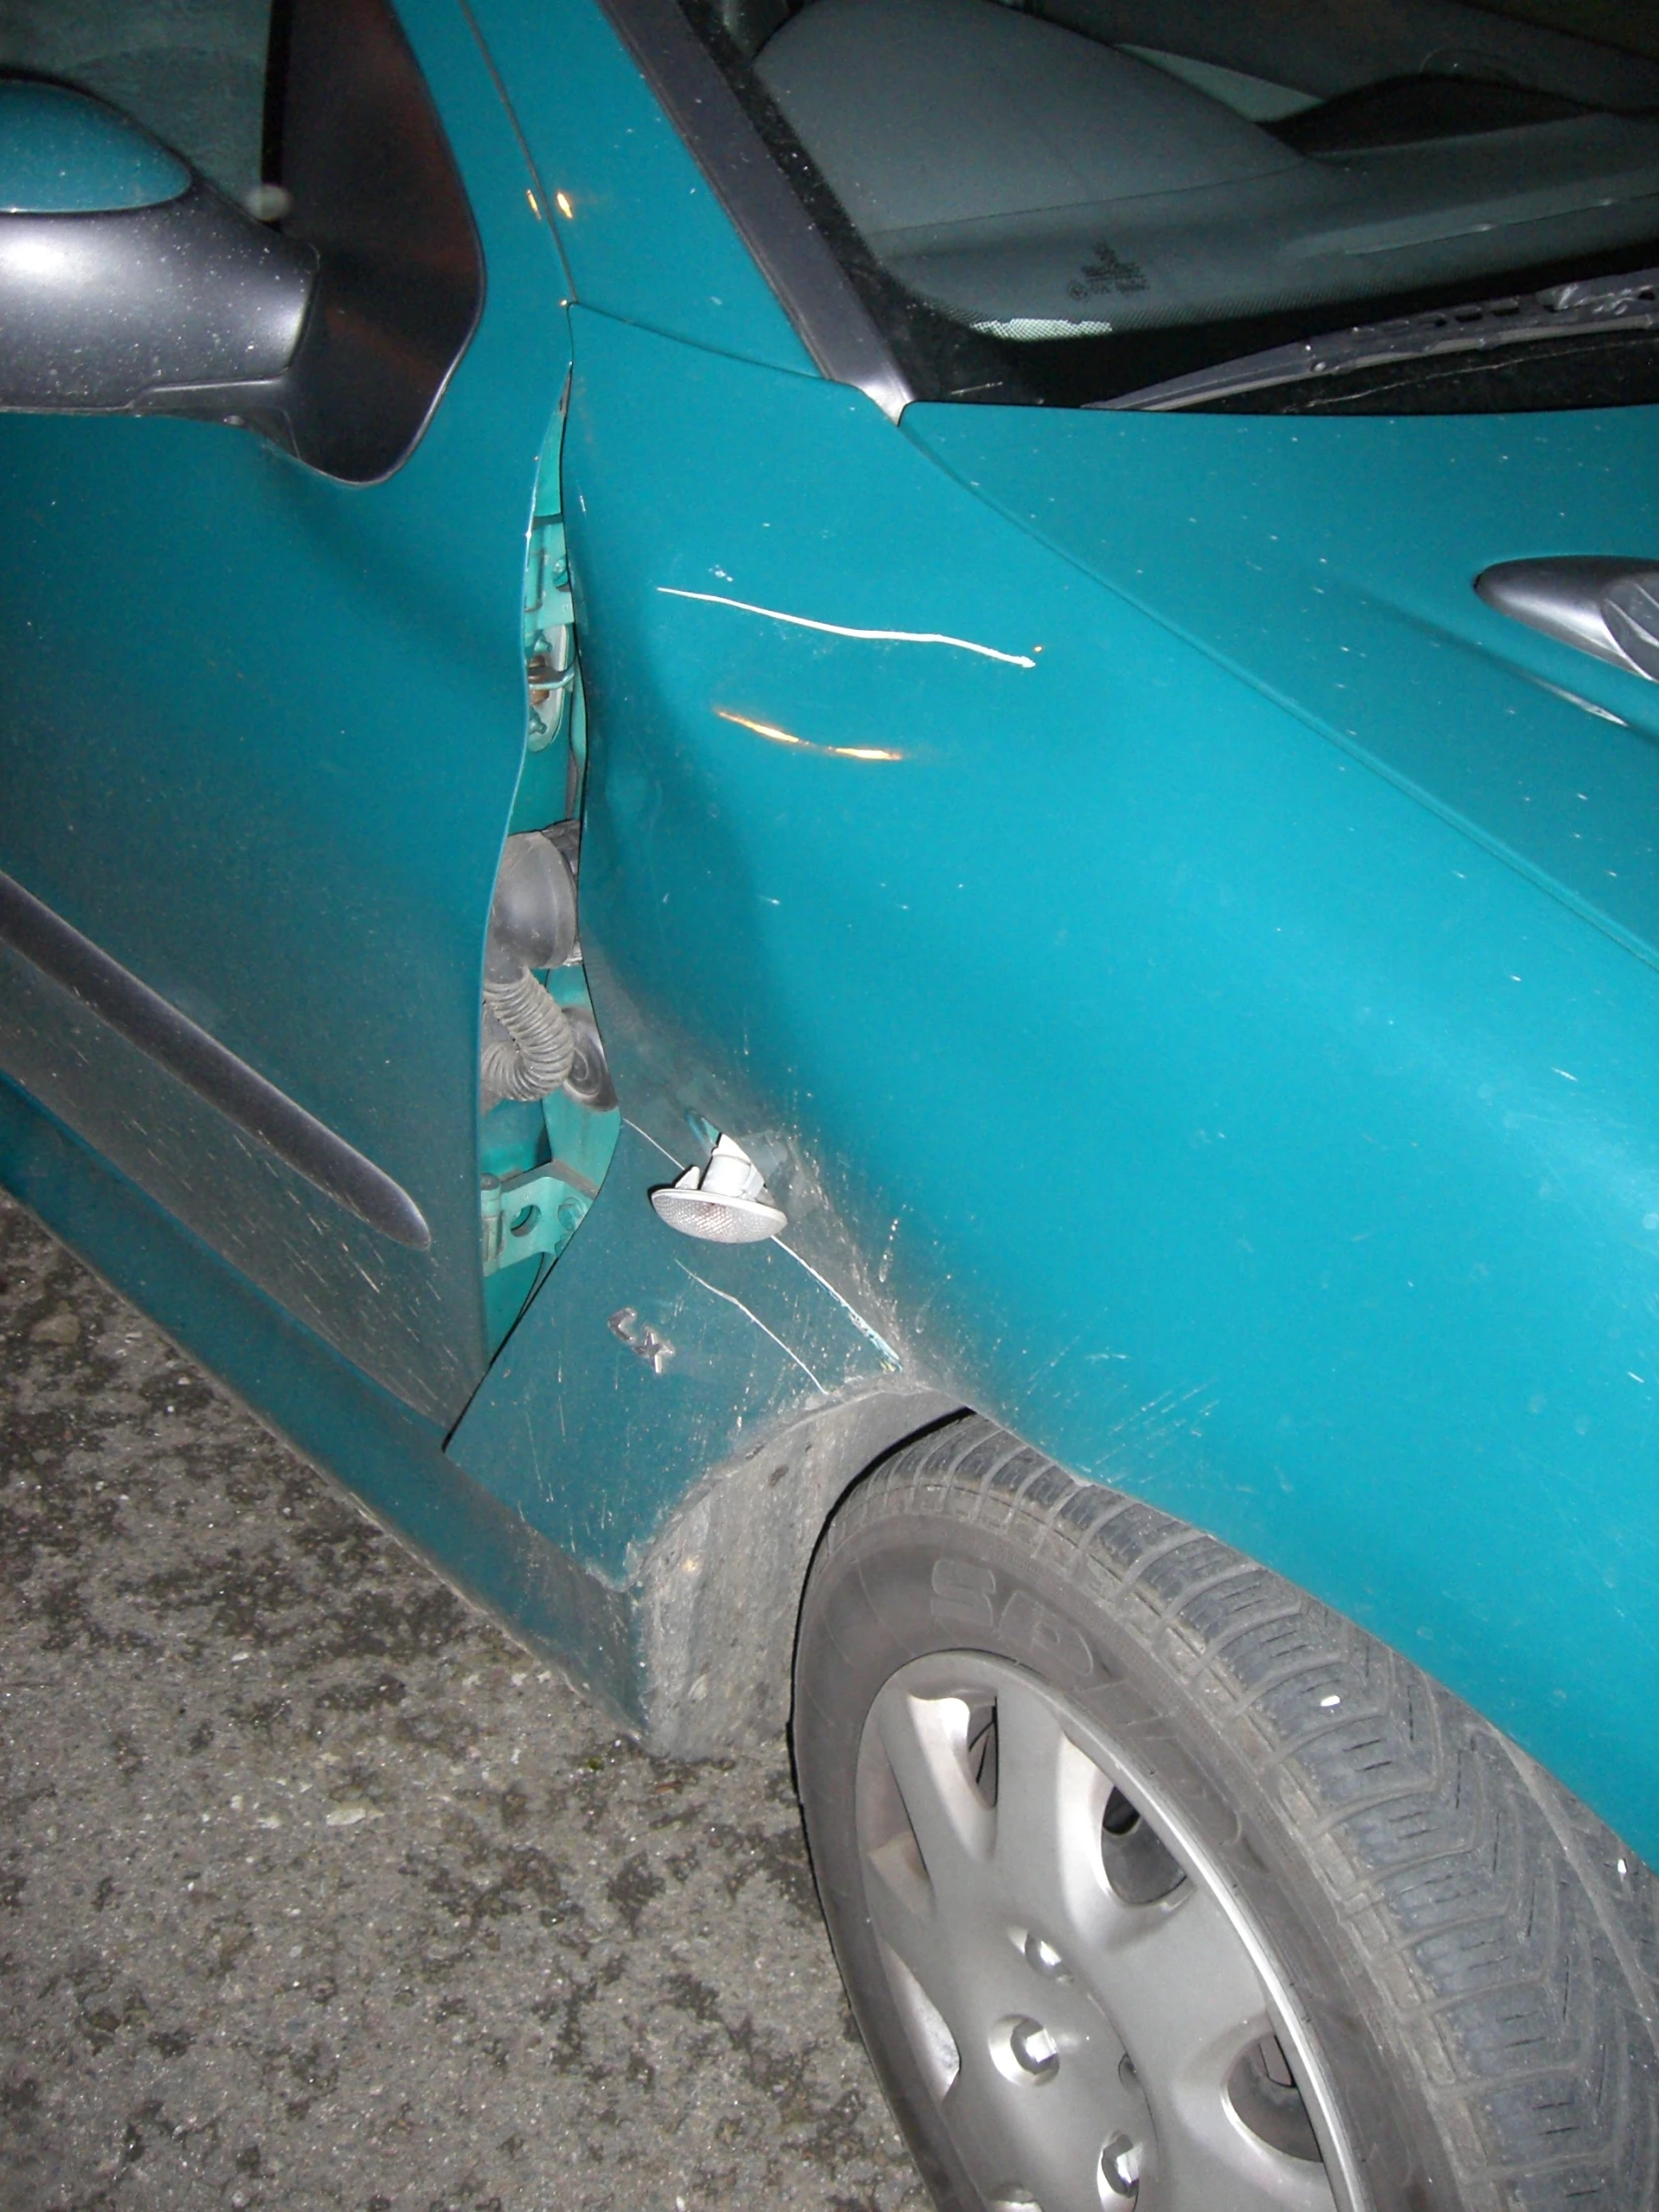 a damaged blue car with two windows and denting